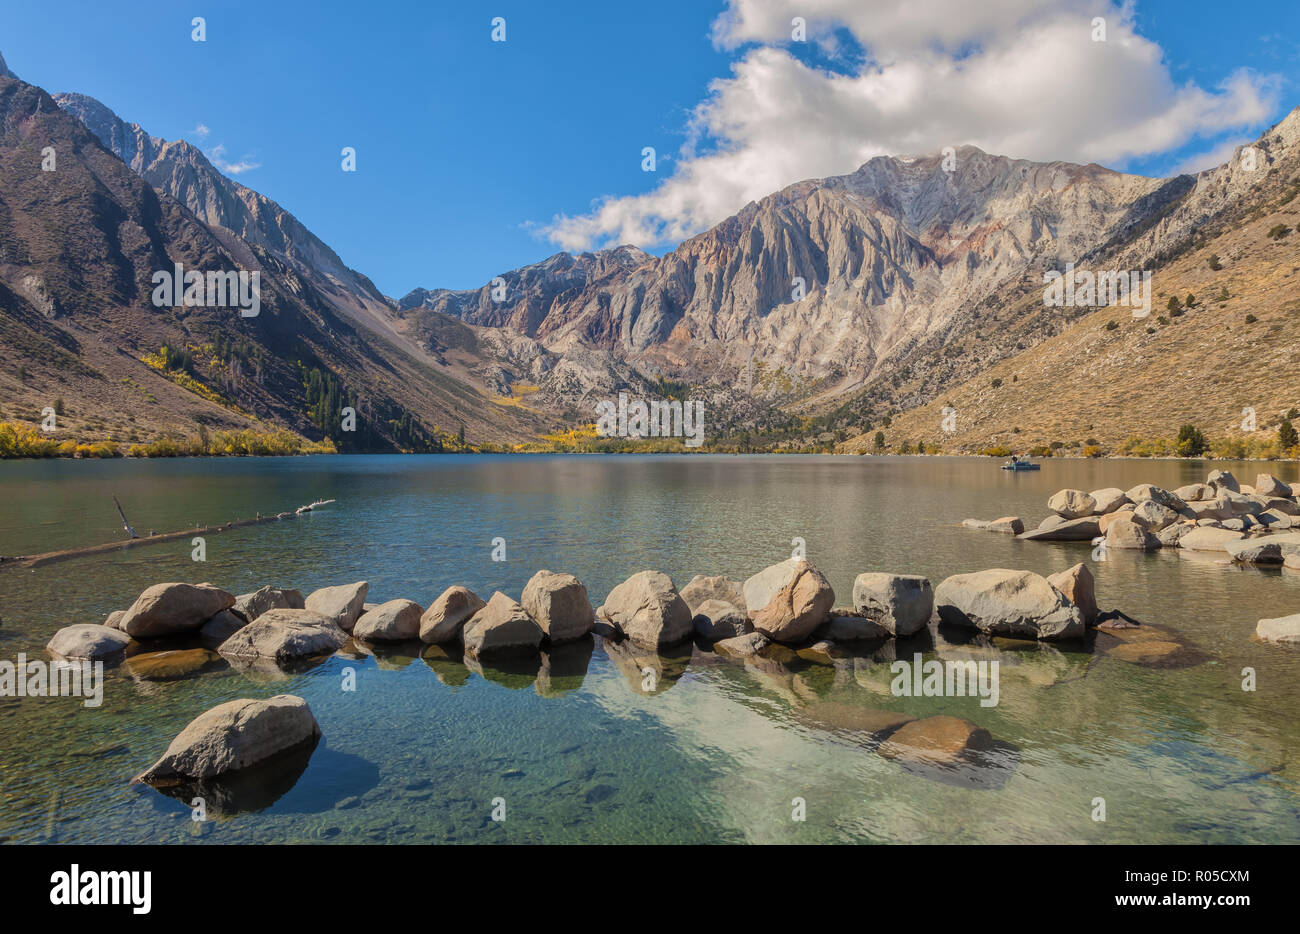 Convict Lake, with Laurel Mountain and the fall foliage, Mono County, California, United States. Stock Photo